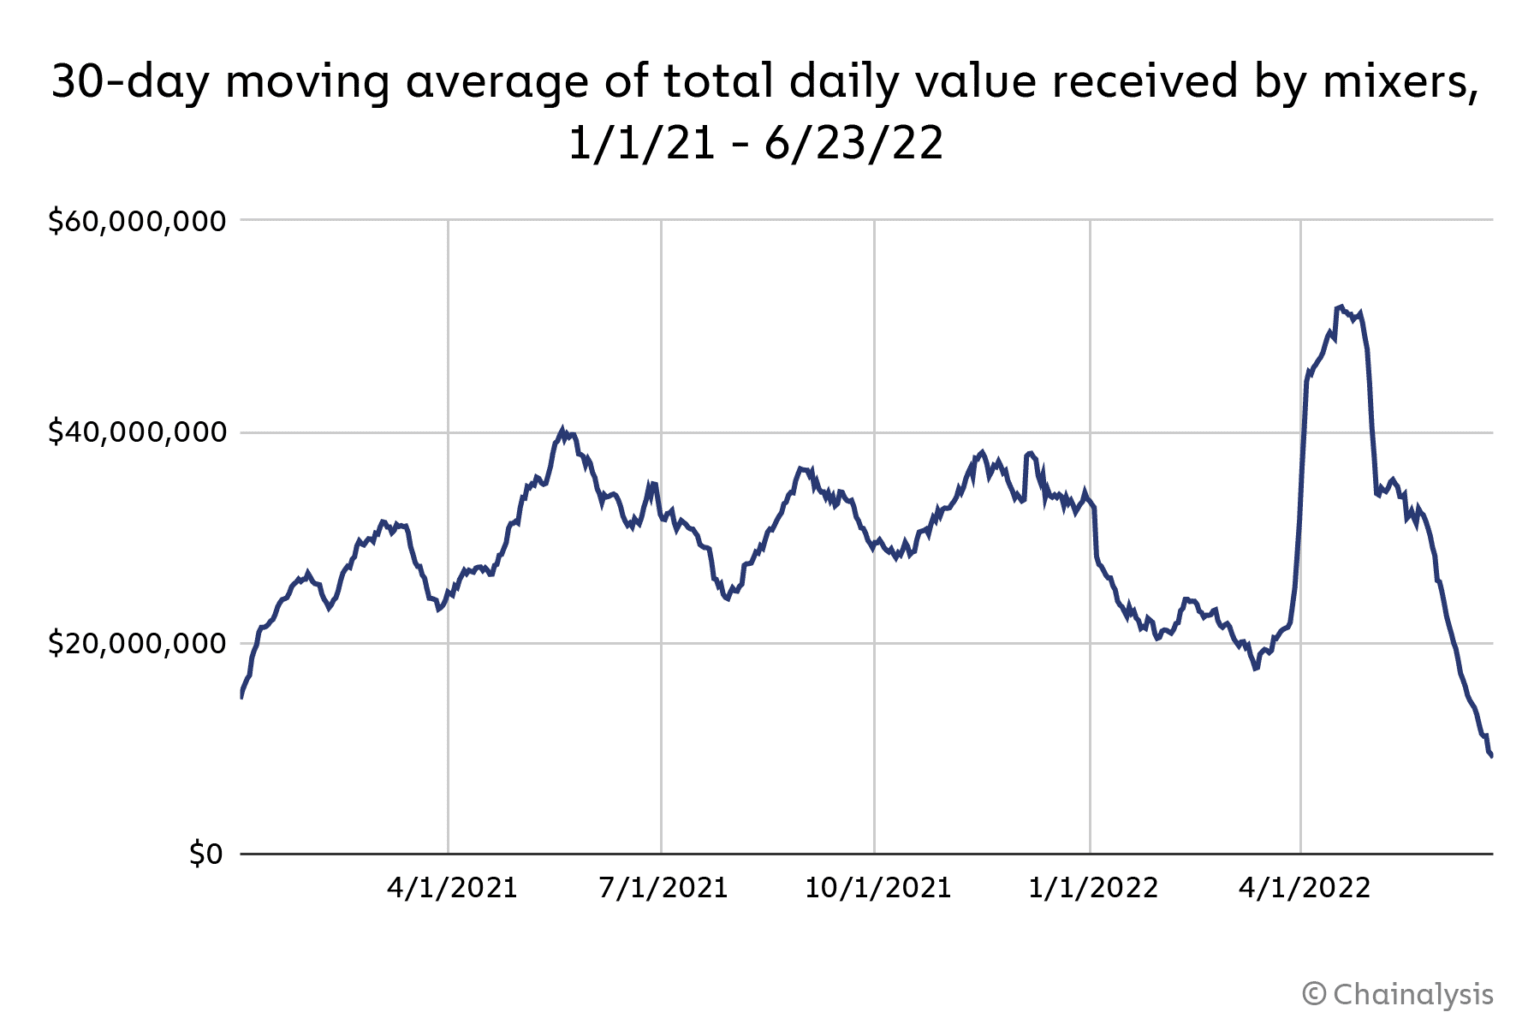 A chart by Chainalysis showing 30-day moving average of total daily value received by mixers from 01.01.21 to 06.23.22